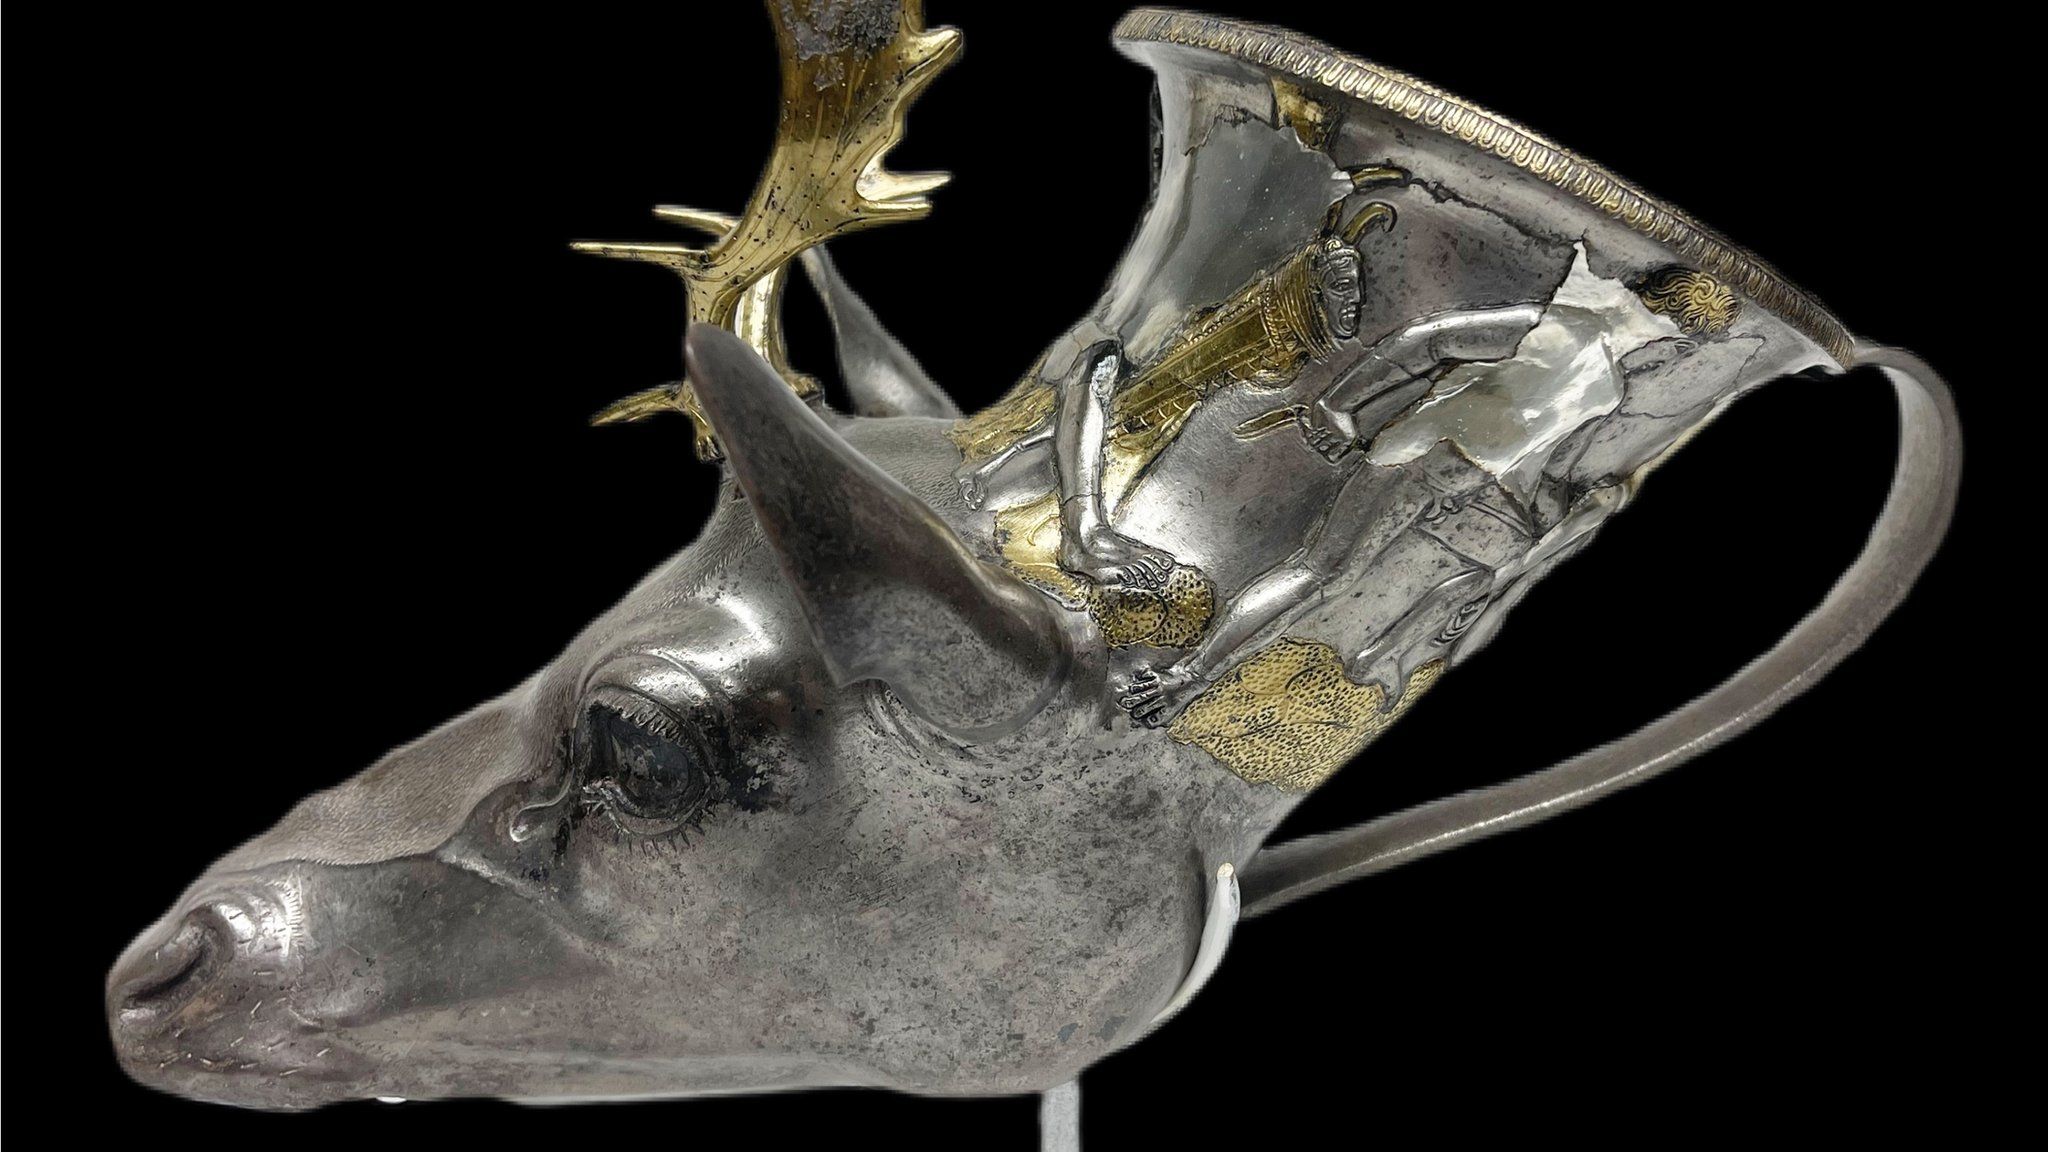 Stag's Head Rhyton, a drinking vessel dating from 400BC worth $3.5m